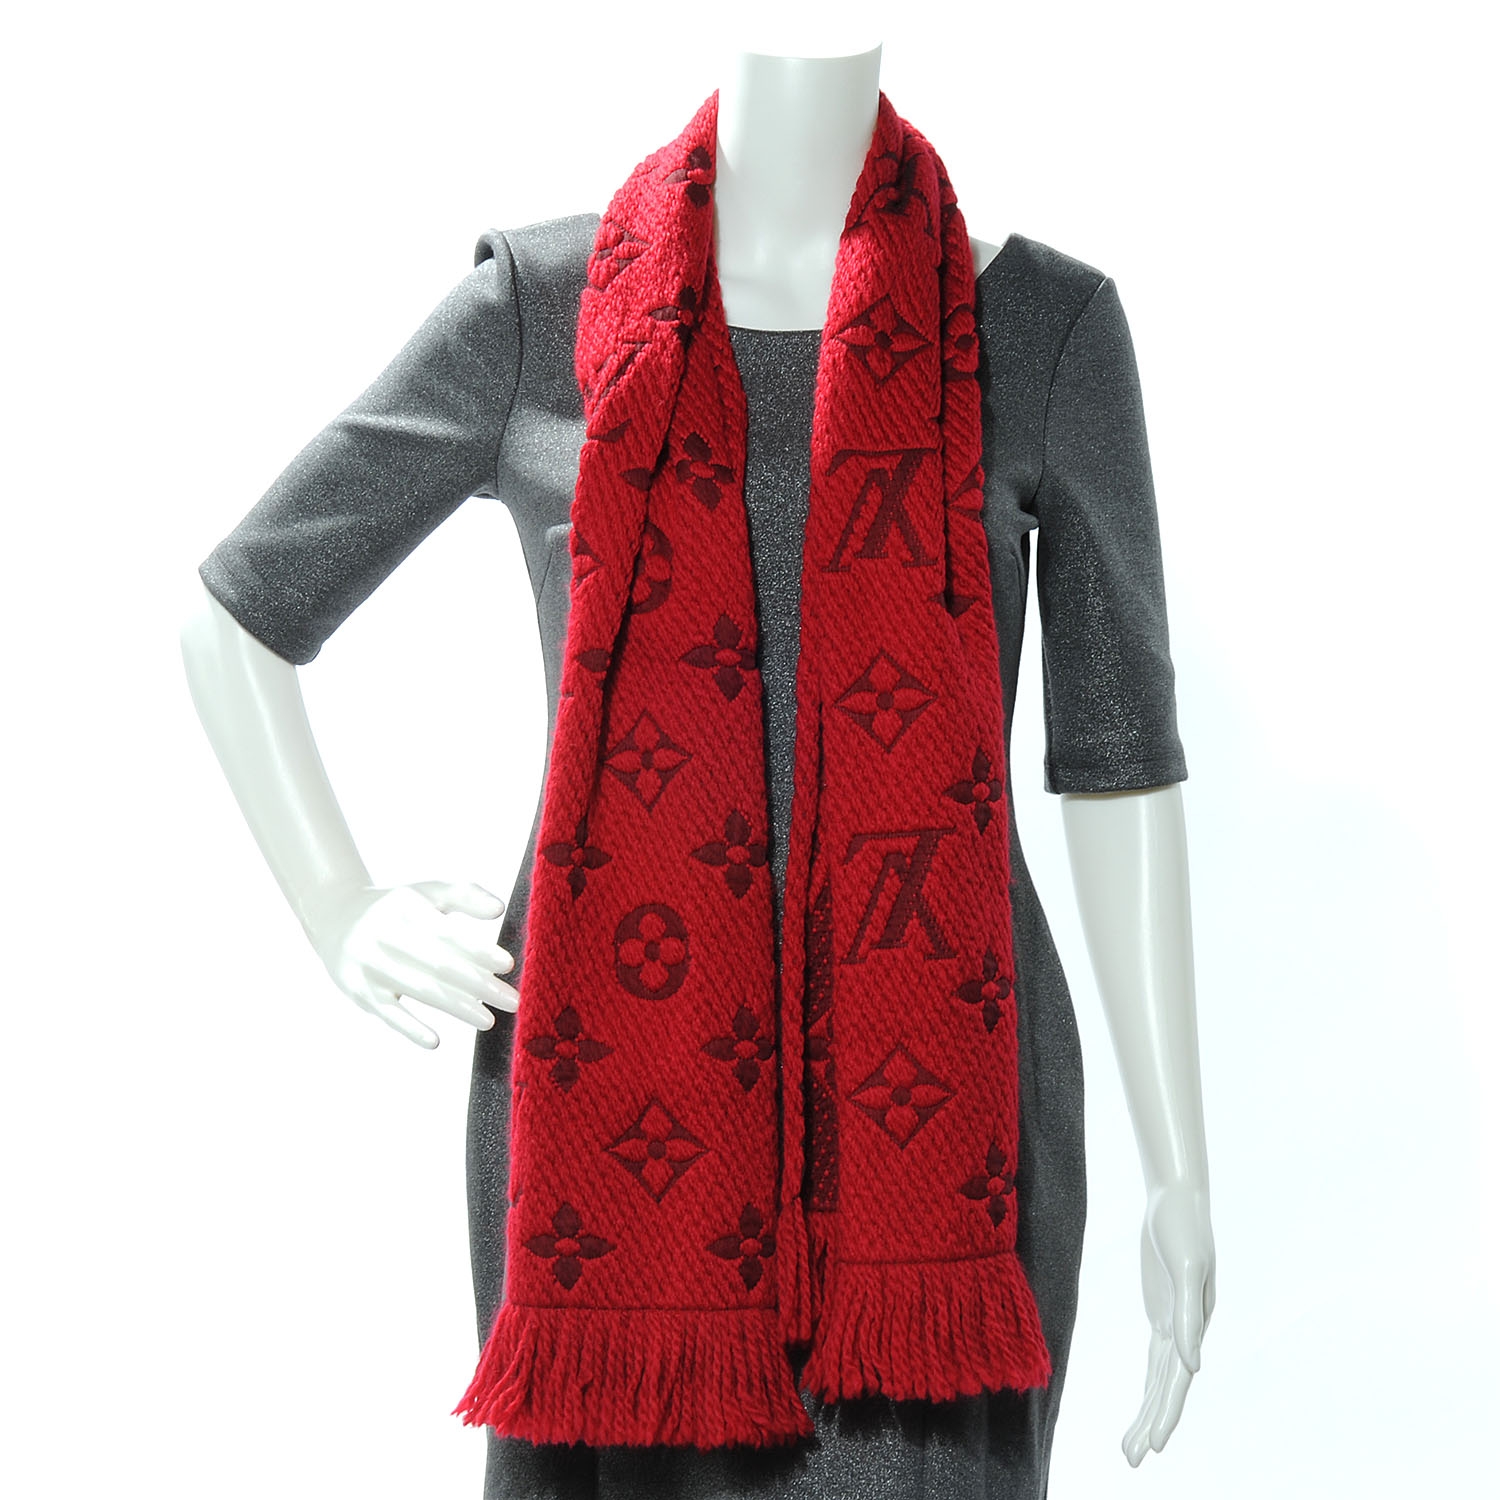 Louis Vuitton Scarf Outfit  Natural Resource Department